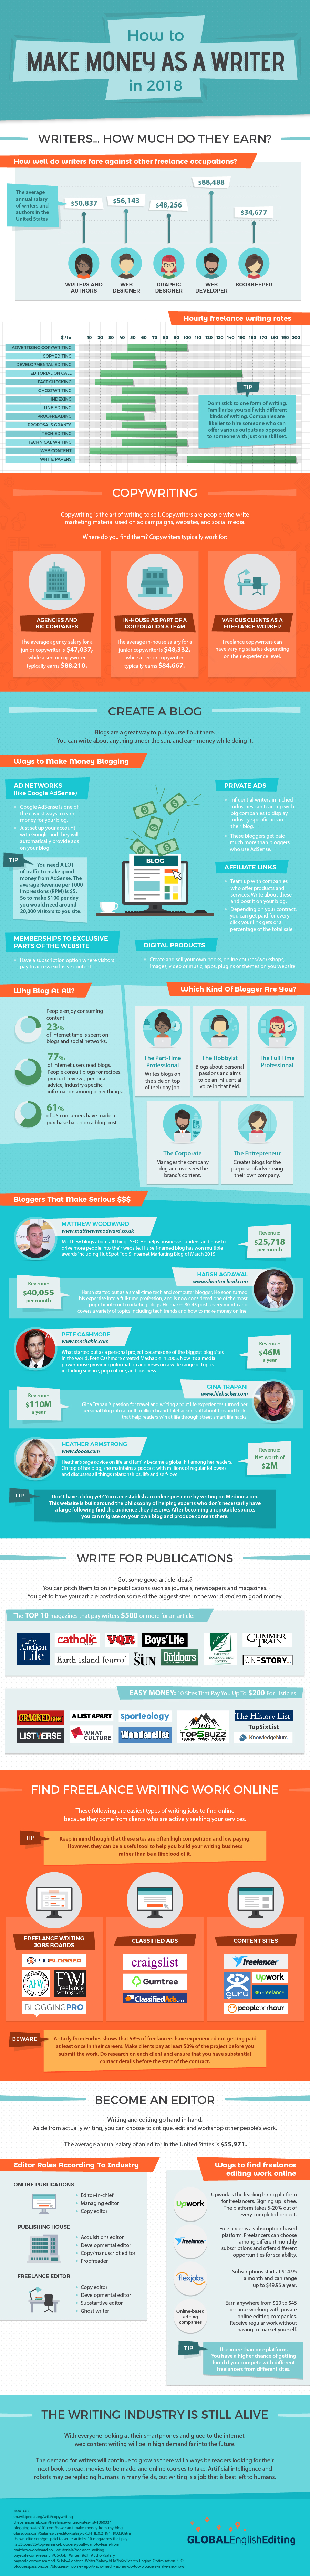 make money as a writer -infographic